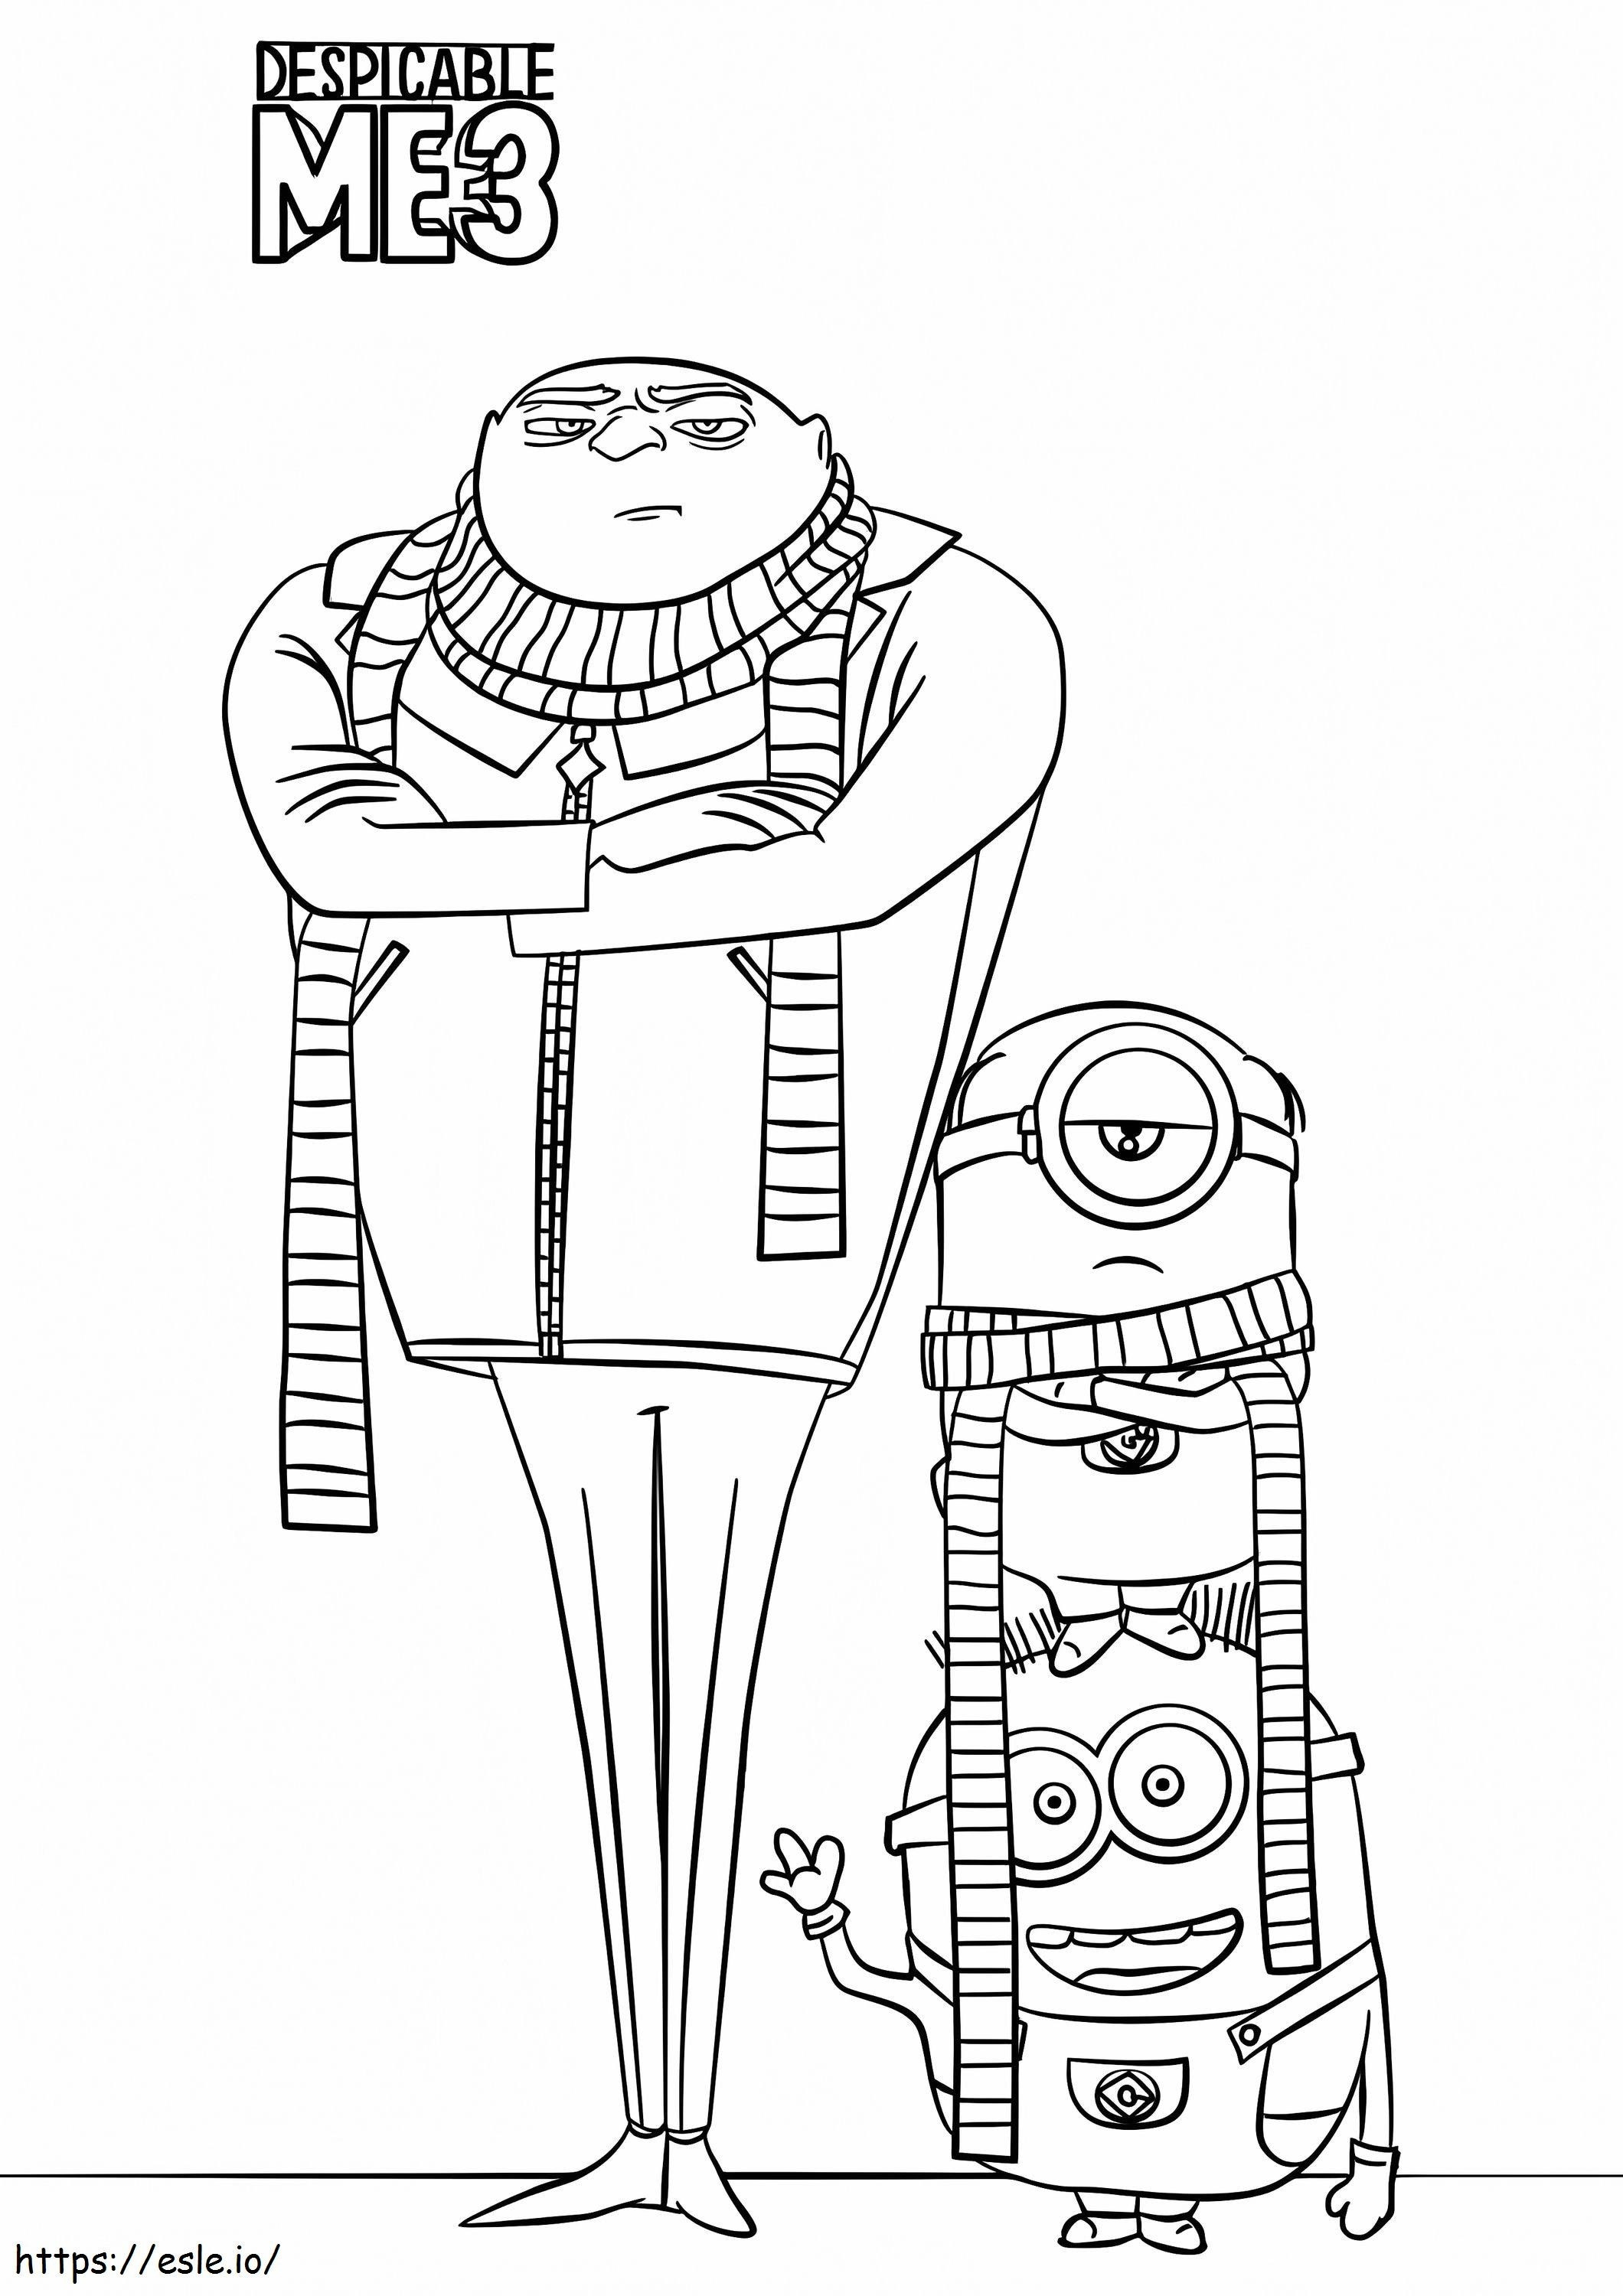 Criminal Gru And Minions coloring page